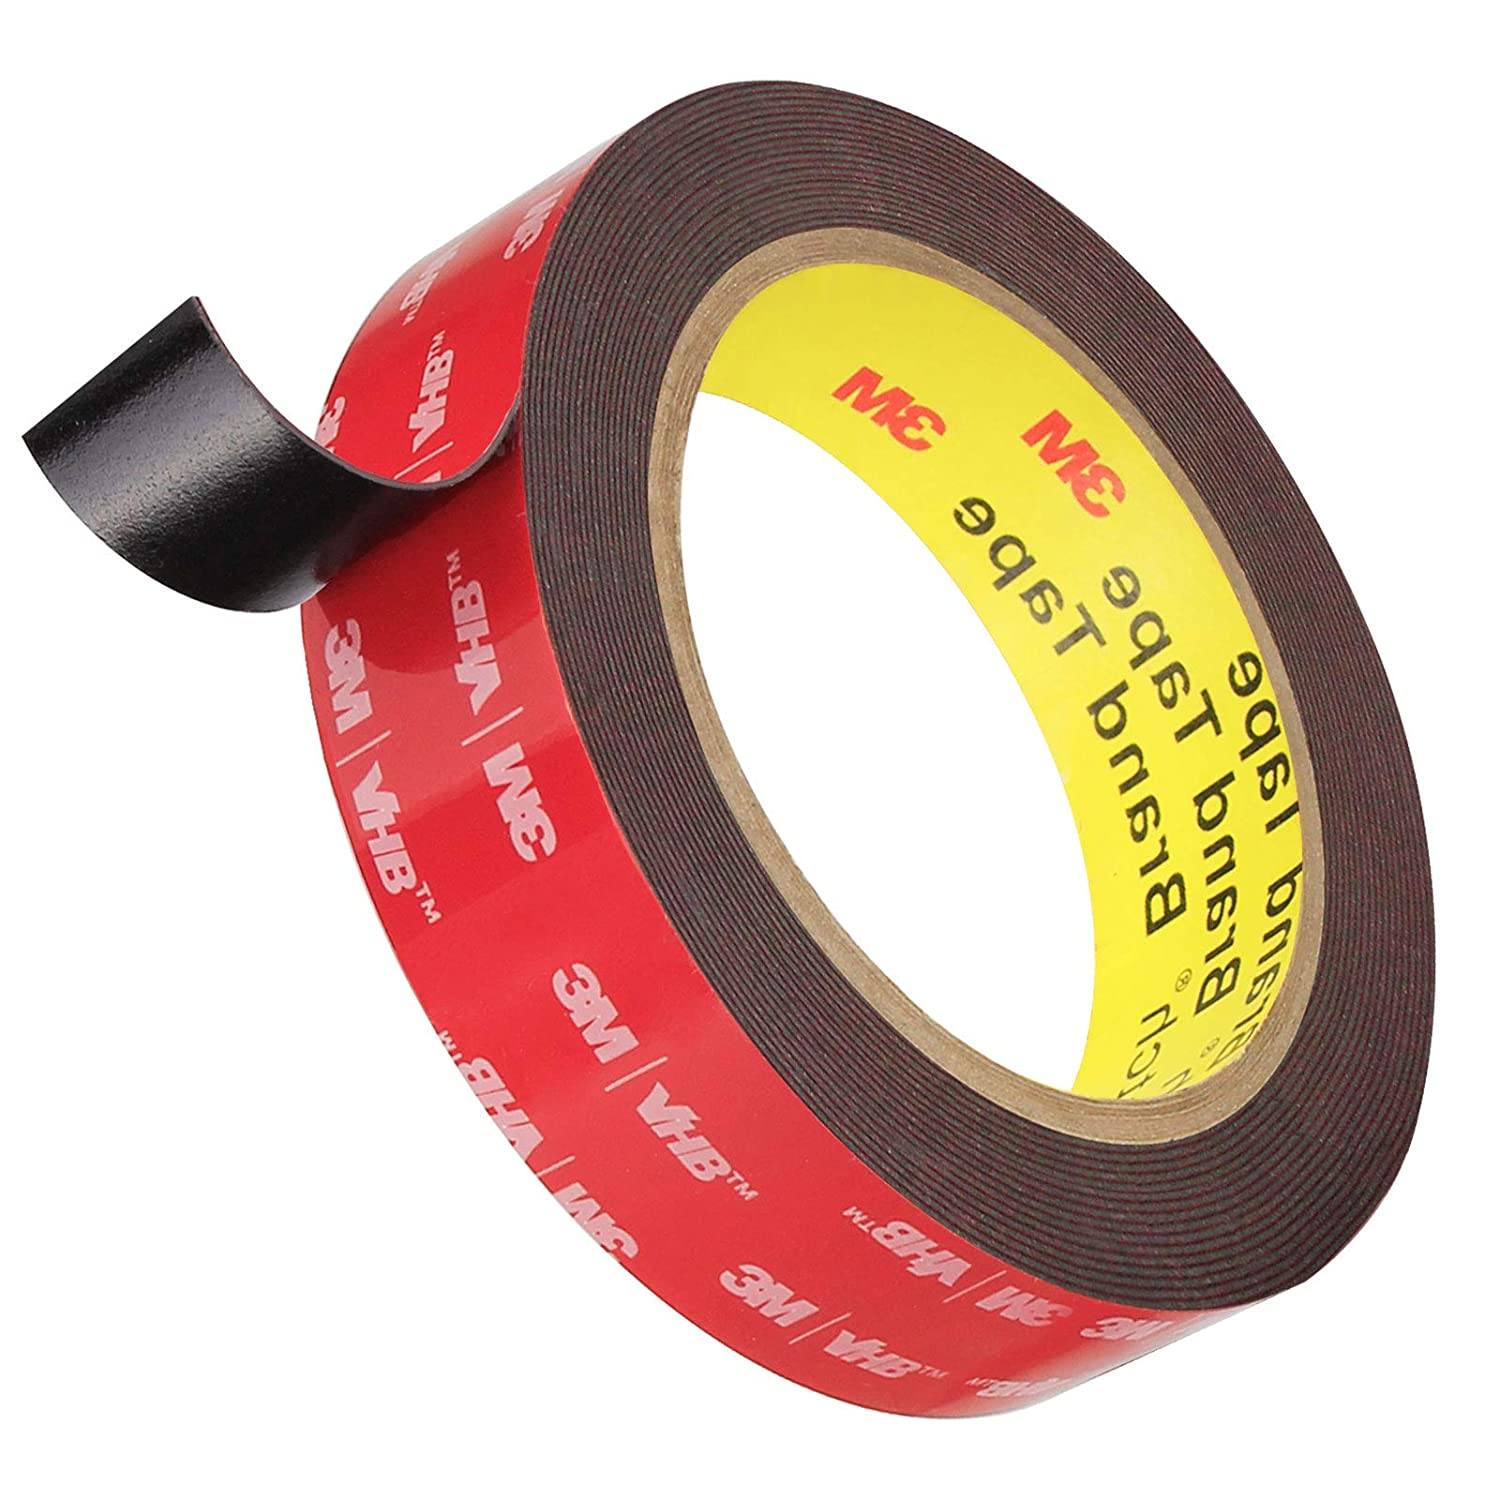 Double Sided Sticky Tape, Single Use, 60 inches, each